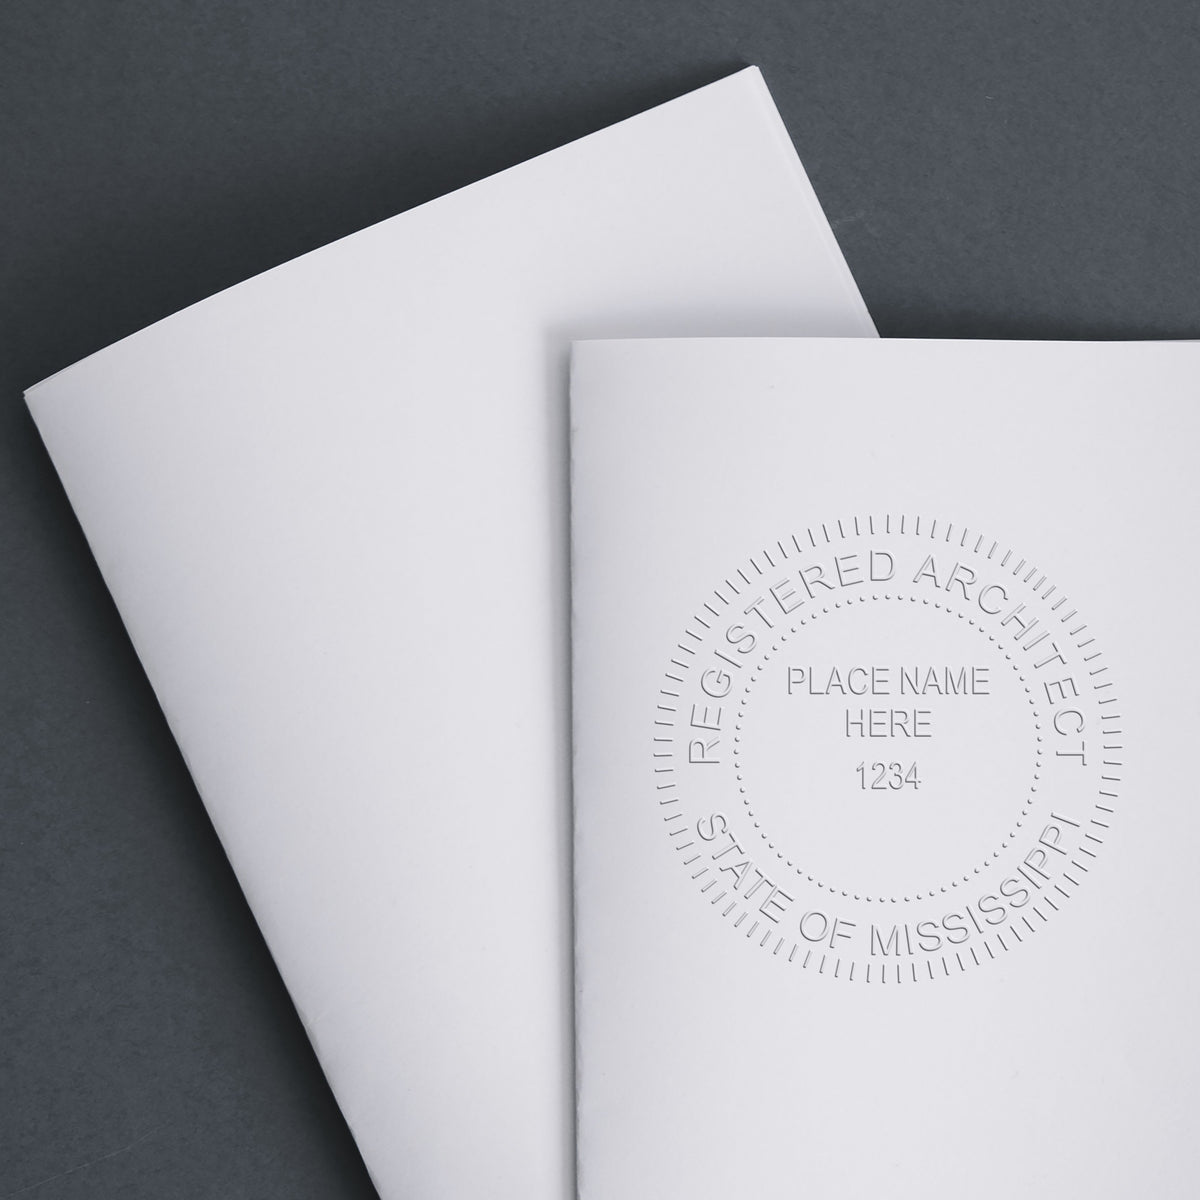 The Mississippi Desk Architect Embossing Seal stamp impression comes to life with a crisp, detailed photo on paper - showcasing true professional quality.